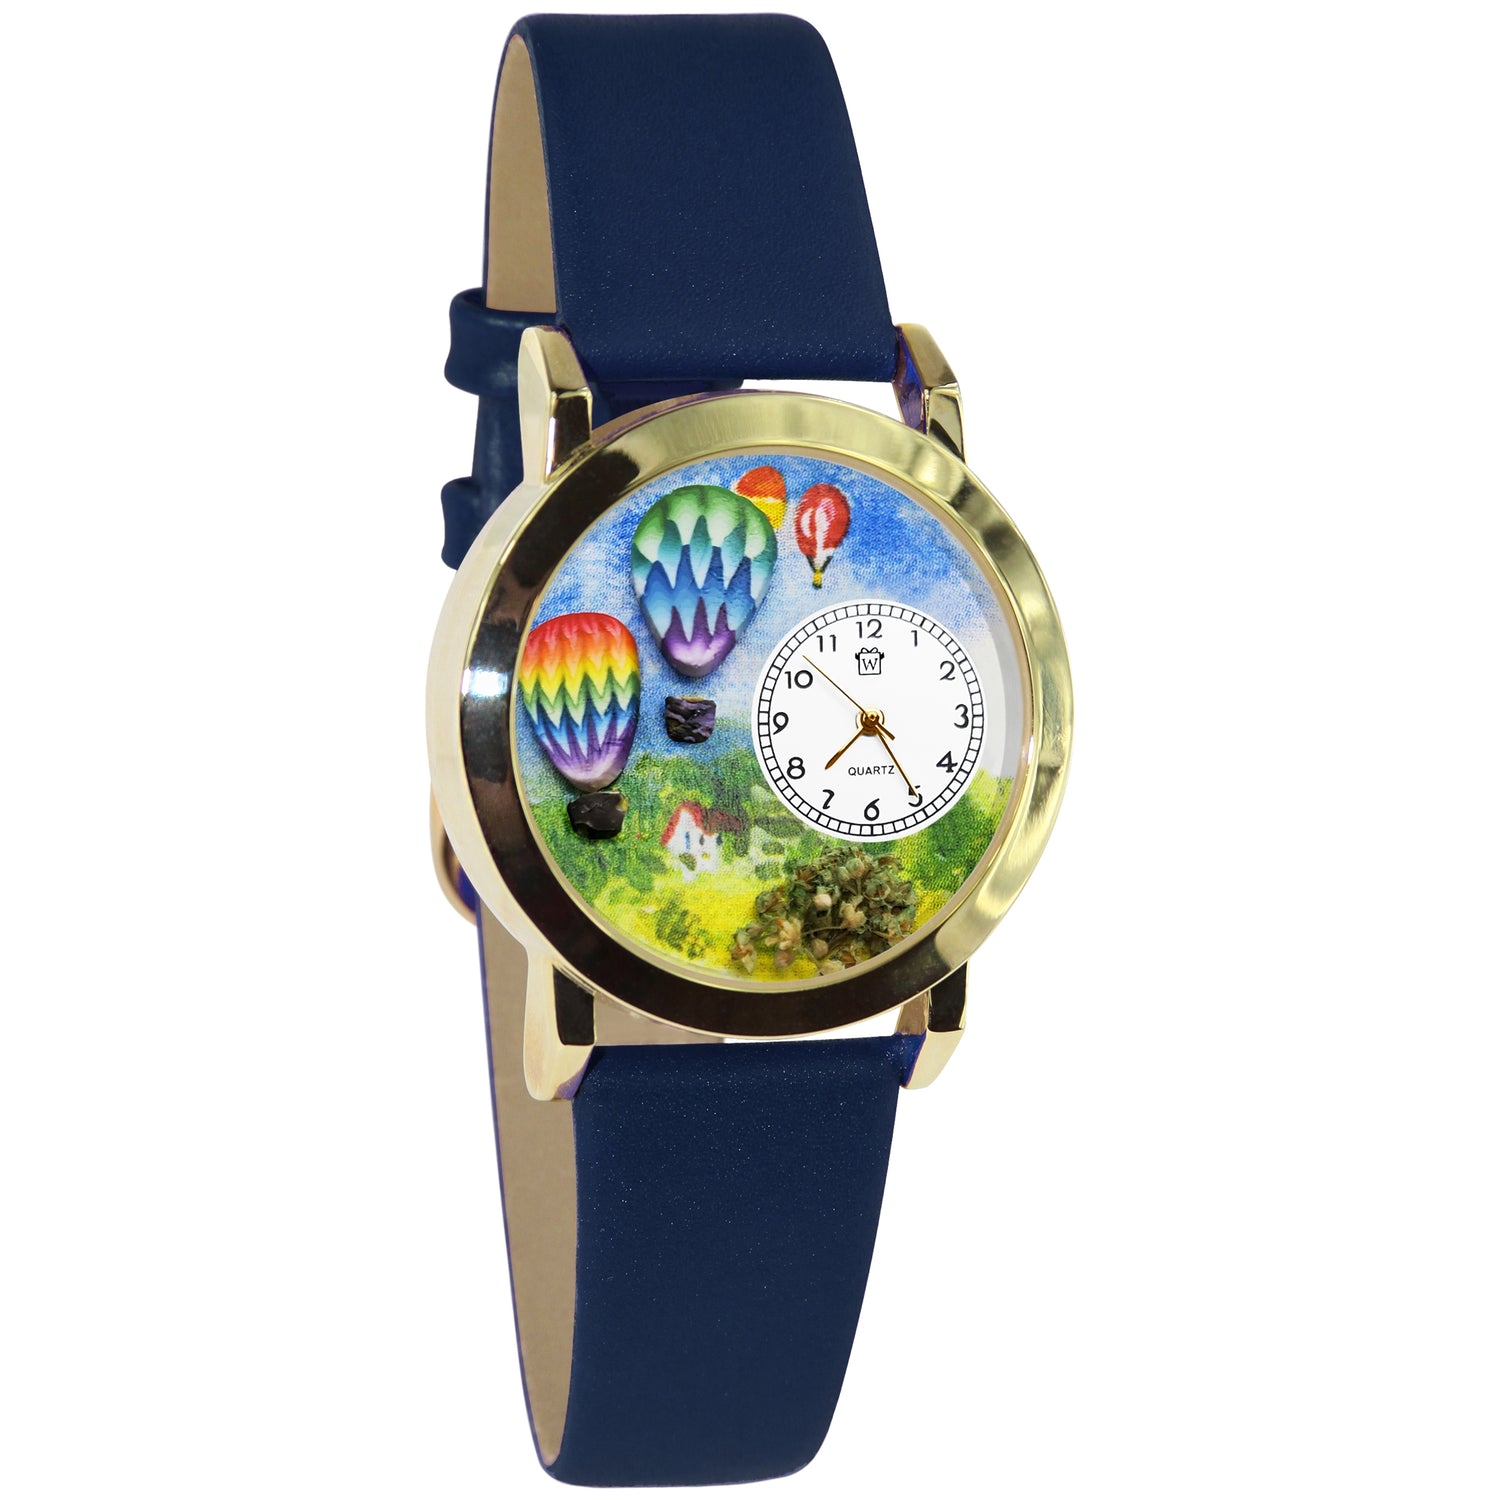 Whimsical Gifts | Hot Air Balloons 3D Watch Small Style | Handmade in USA | Hobbies & Special Interests | Outdoor Hobbies | Novelty Unique Fun Miniatures Gift | Gold Finish Blue Leather Watch Band